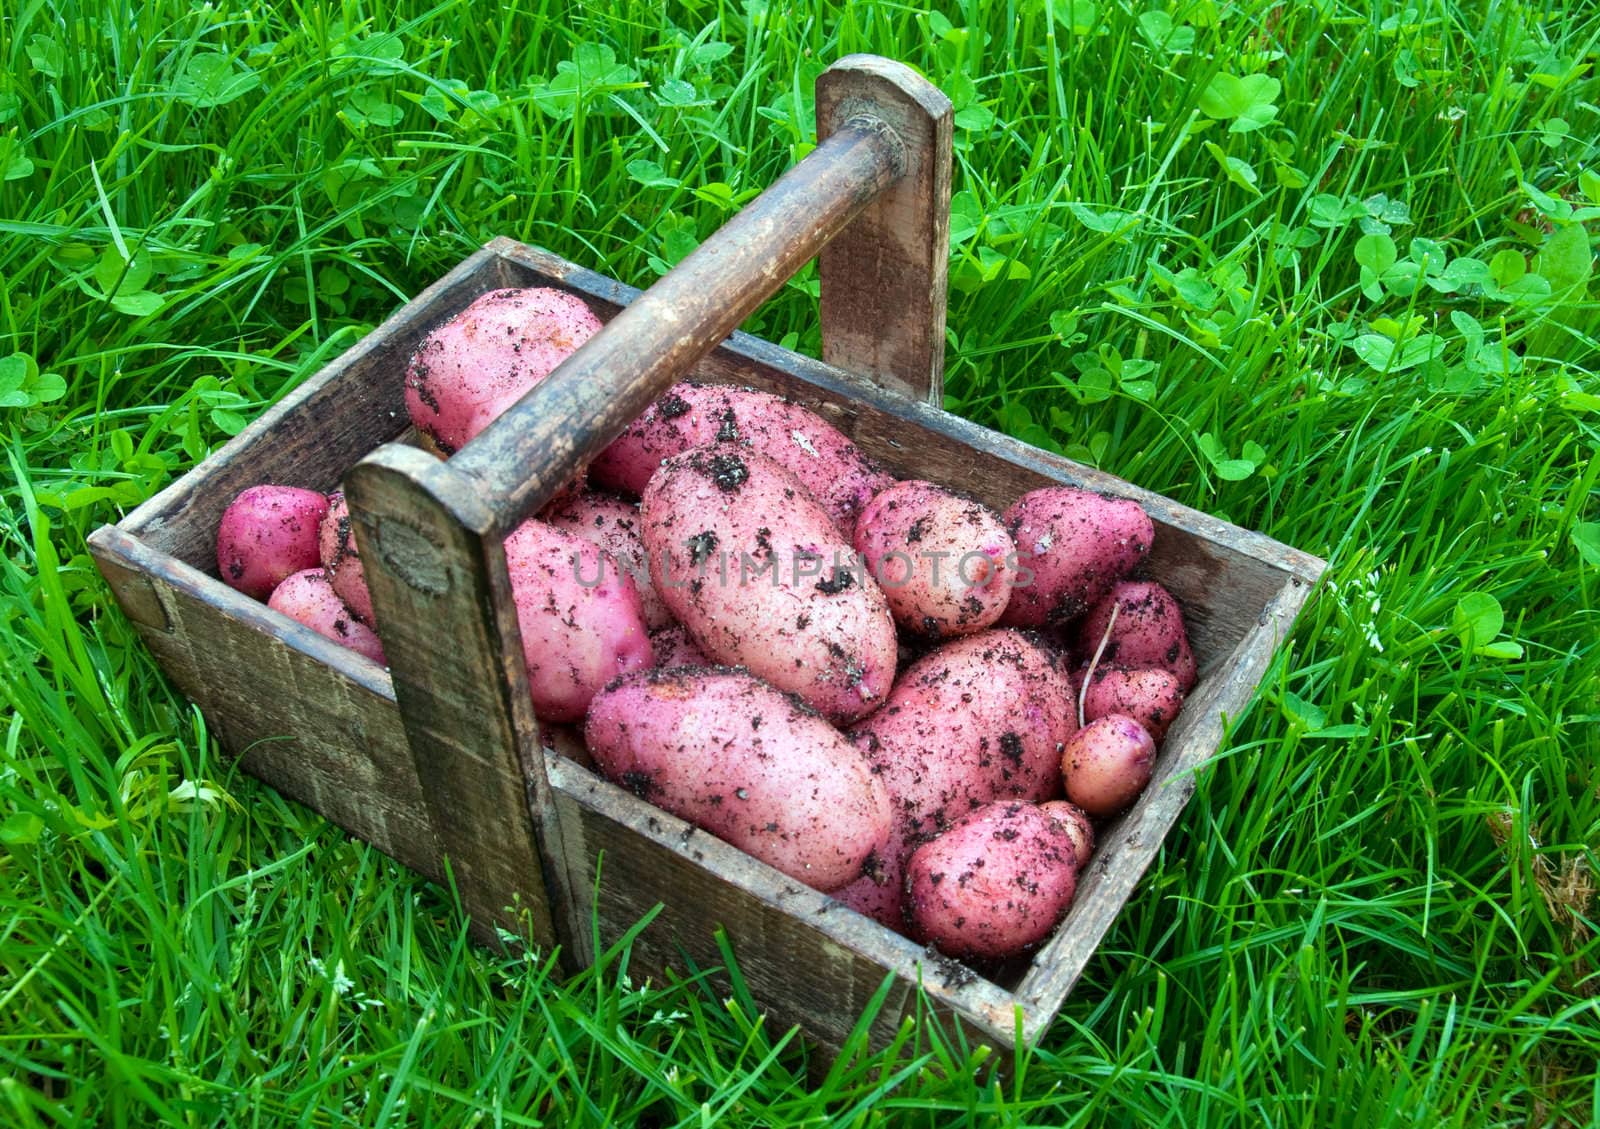 Fresh potatoes with soil on in a wooden tray